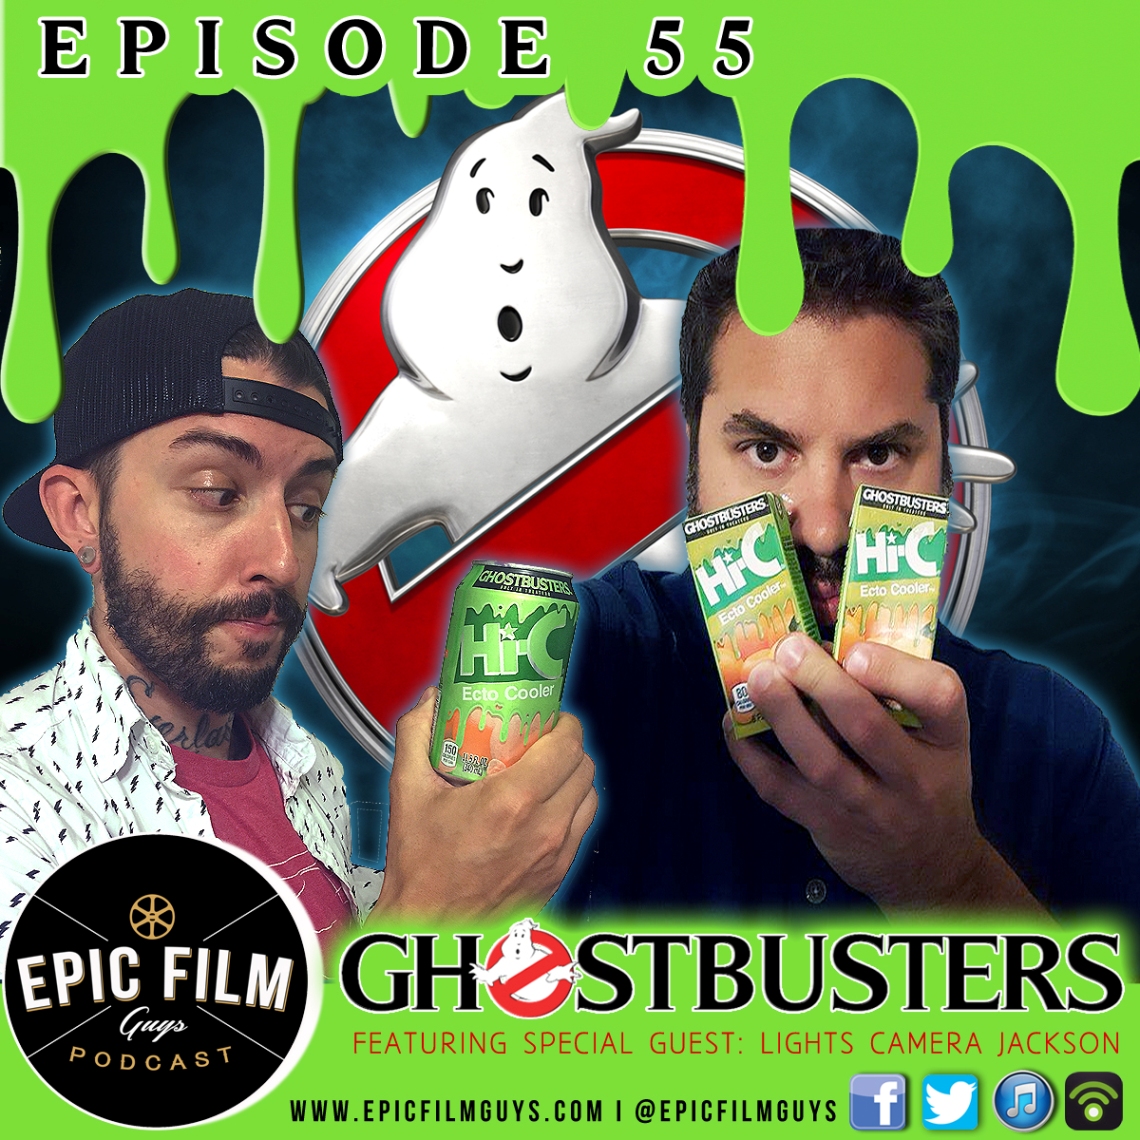 Episode 055 - Ghostbusters with Girls is Good!